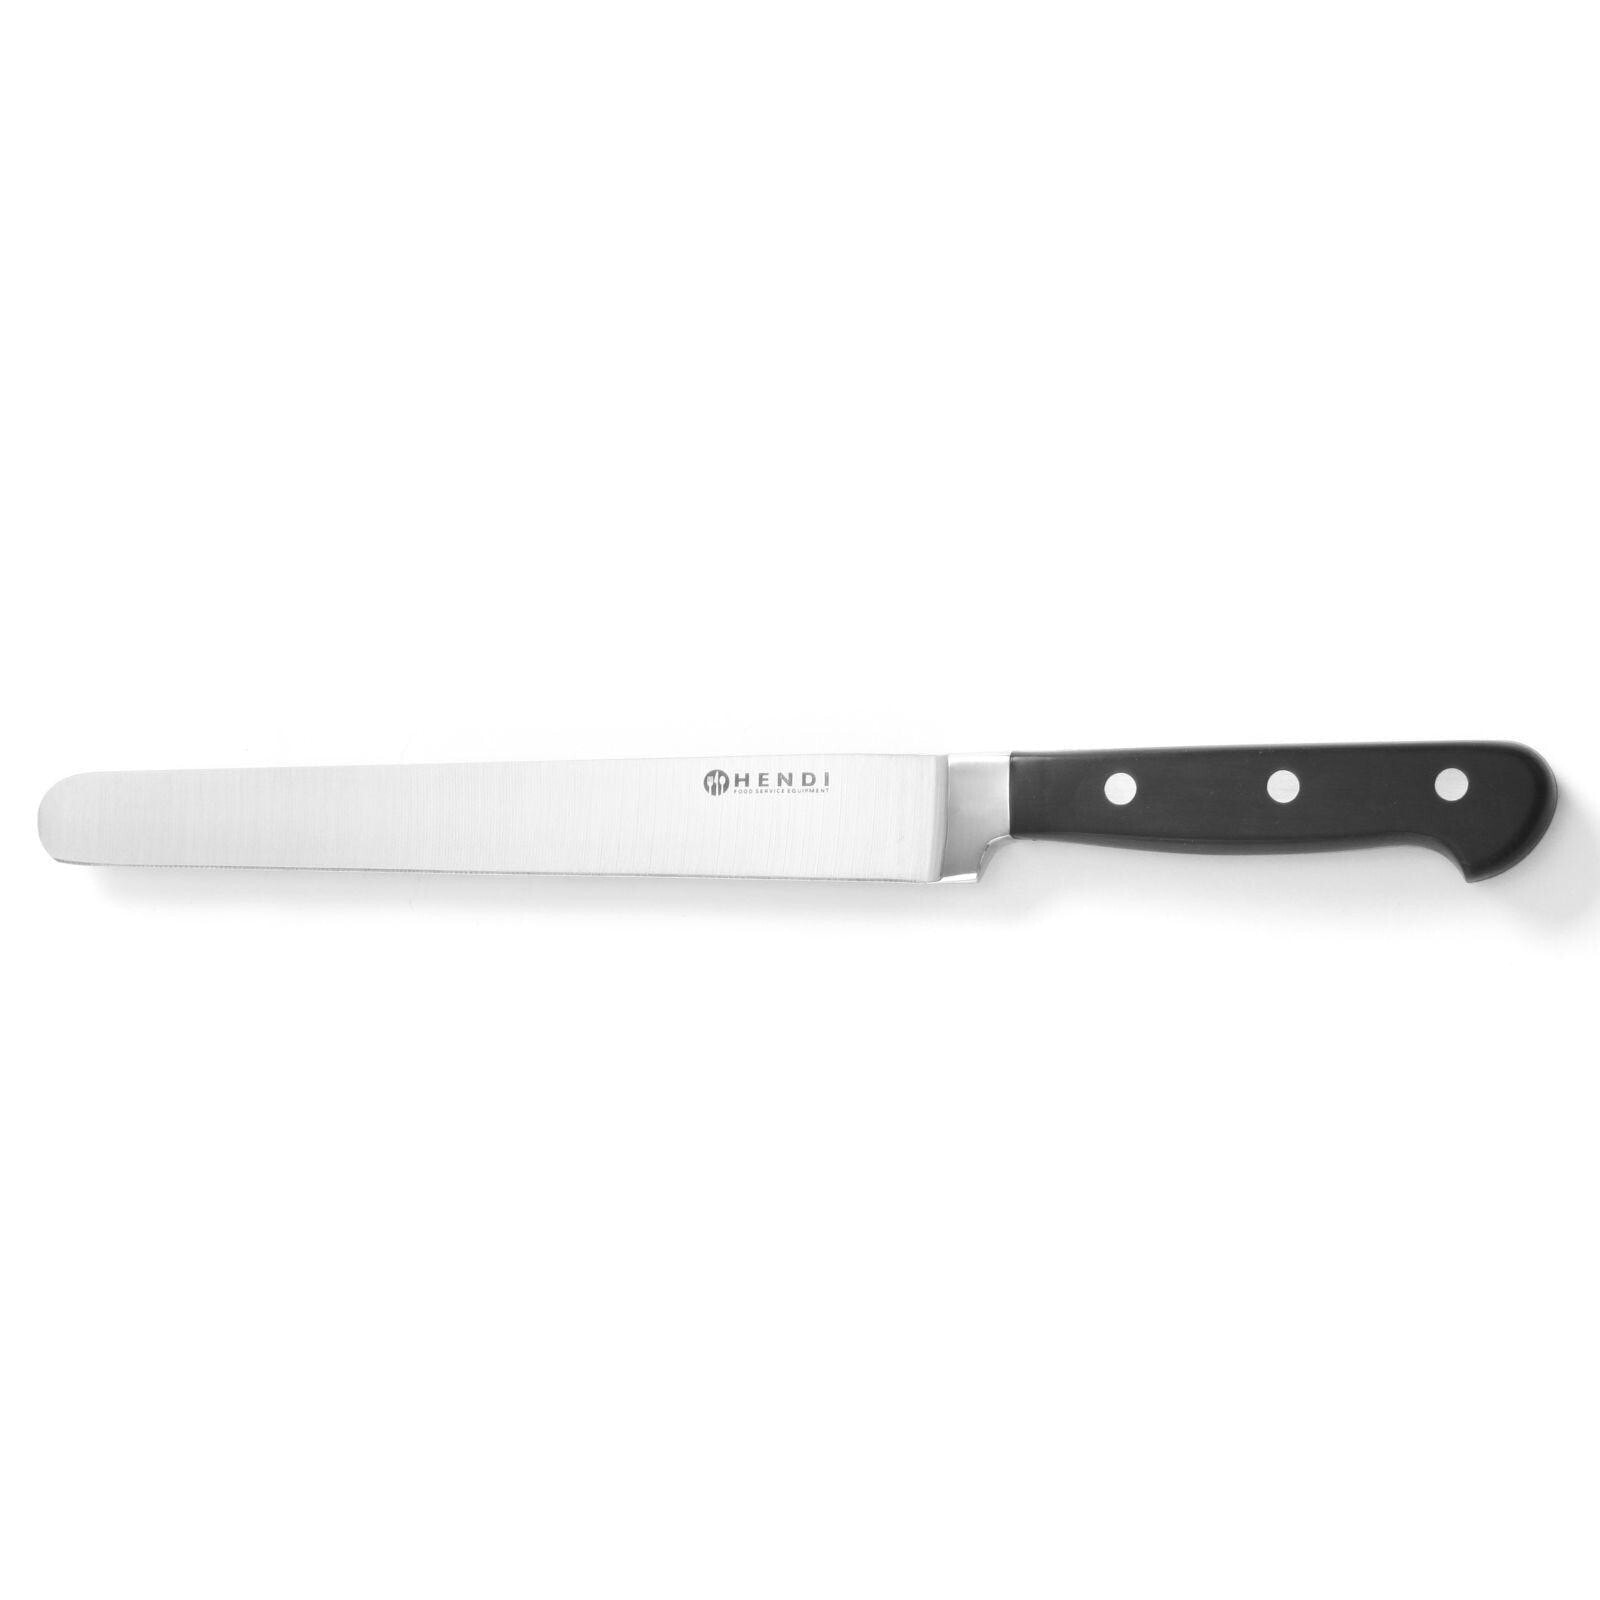 Professional ham and salmon knife forged from Kitchen Line steel 215 mm - Hendi 781326